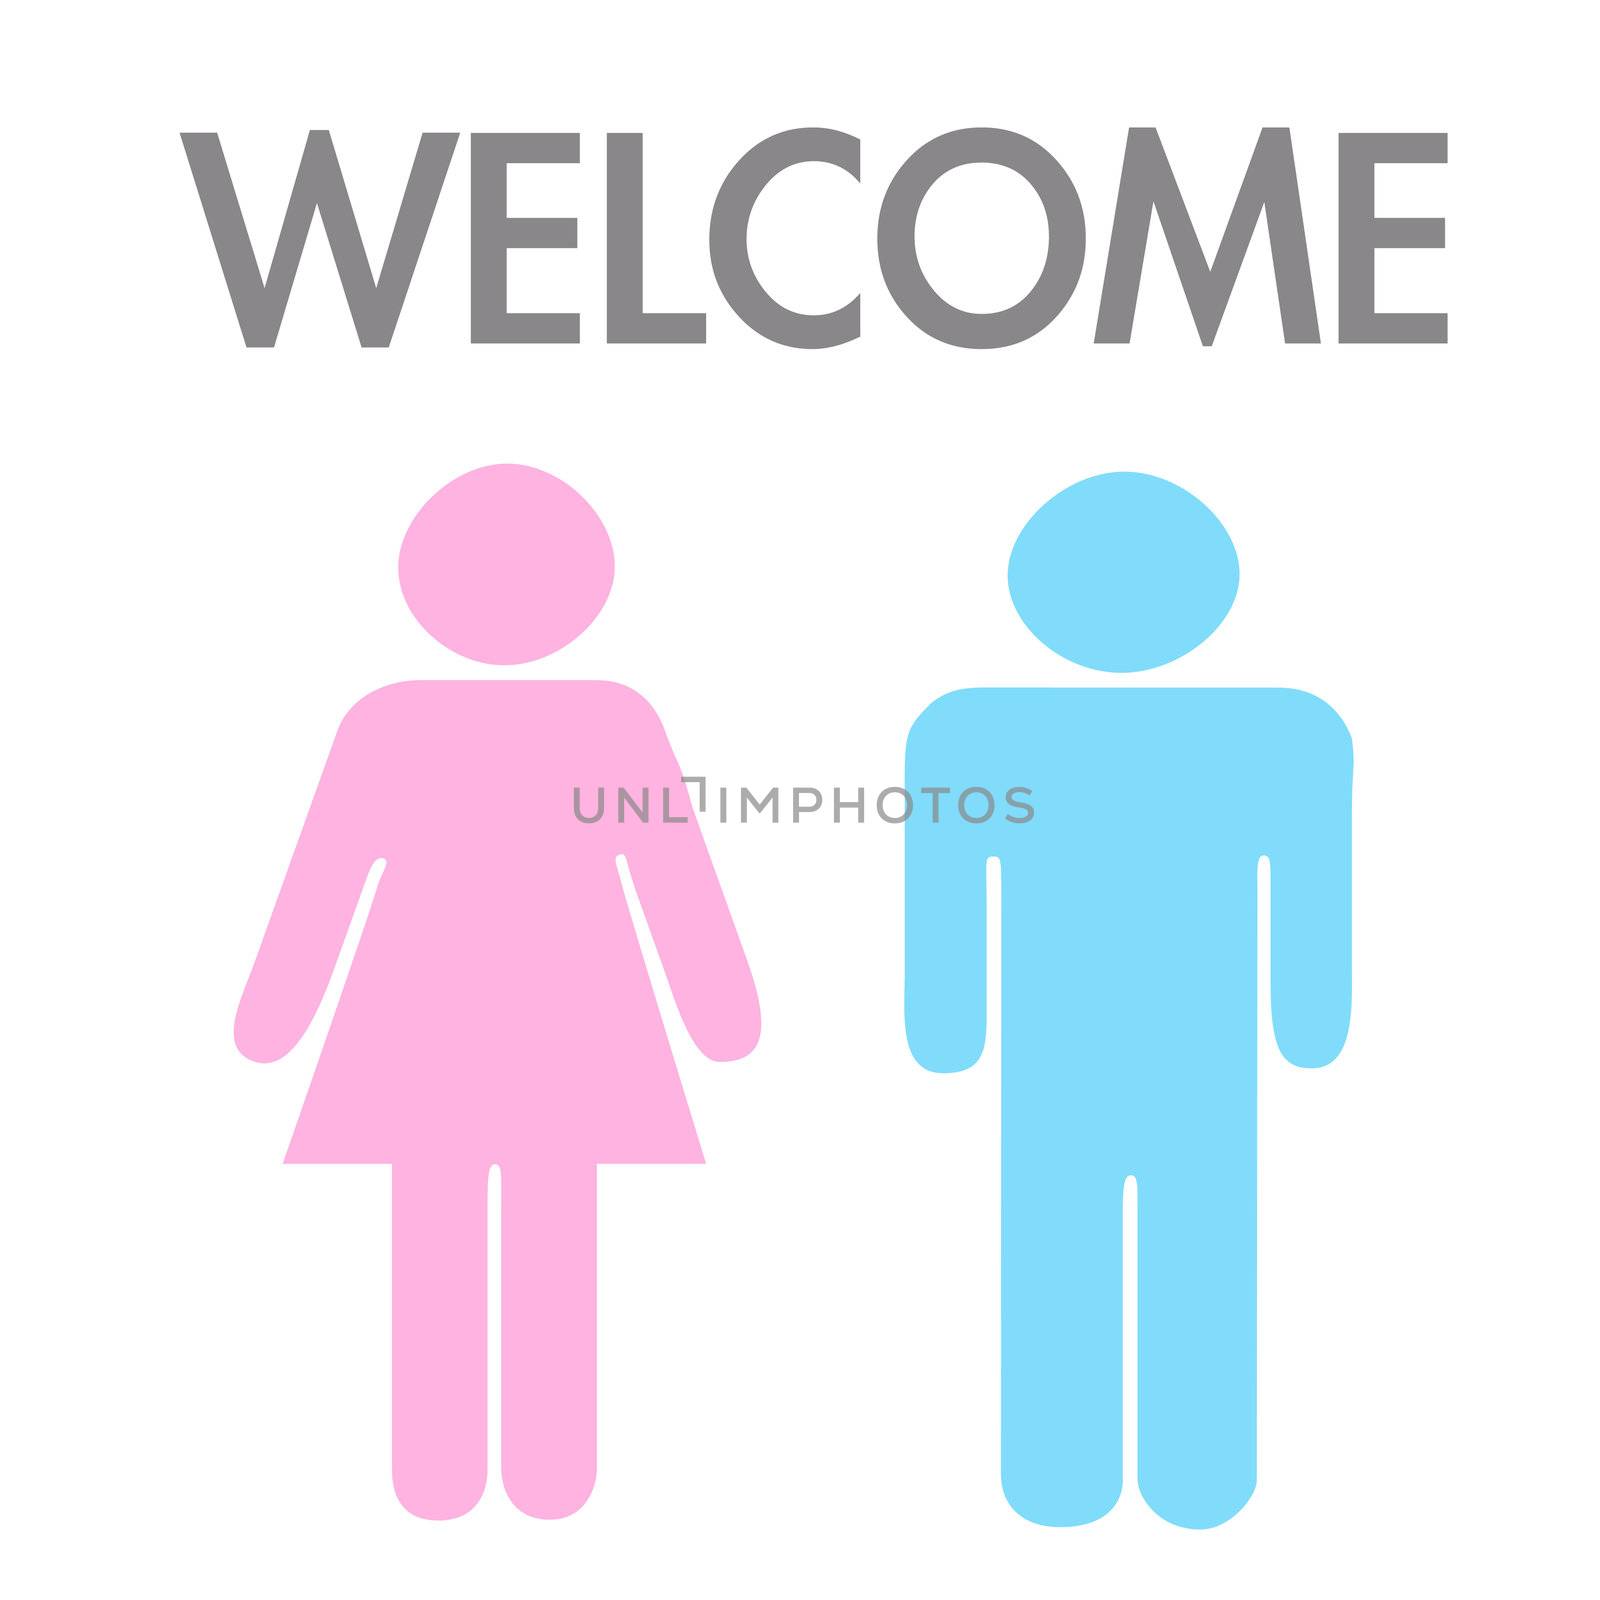 Welcome concept by man and woman, vector image. by kawing921